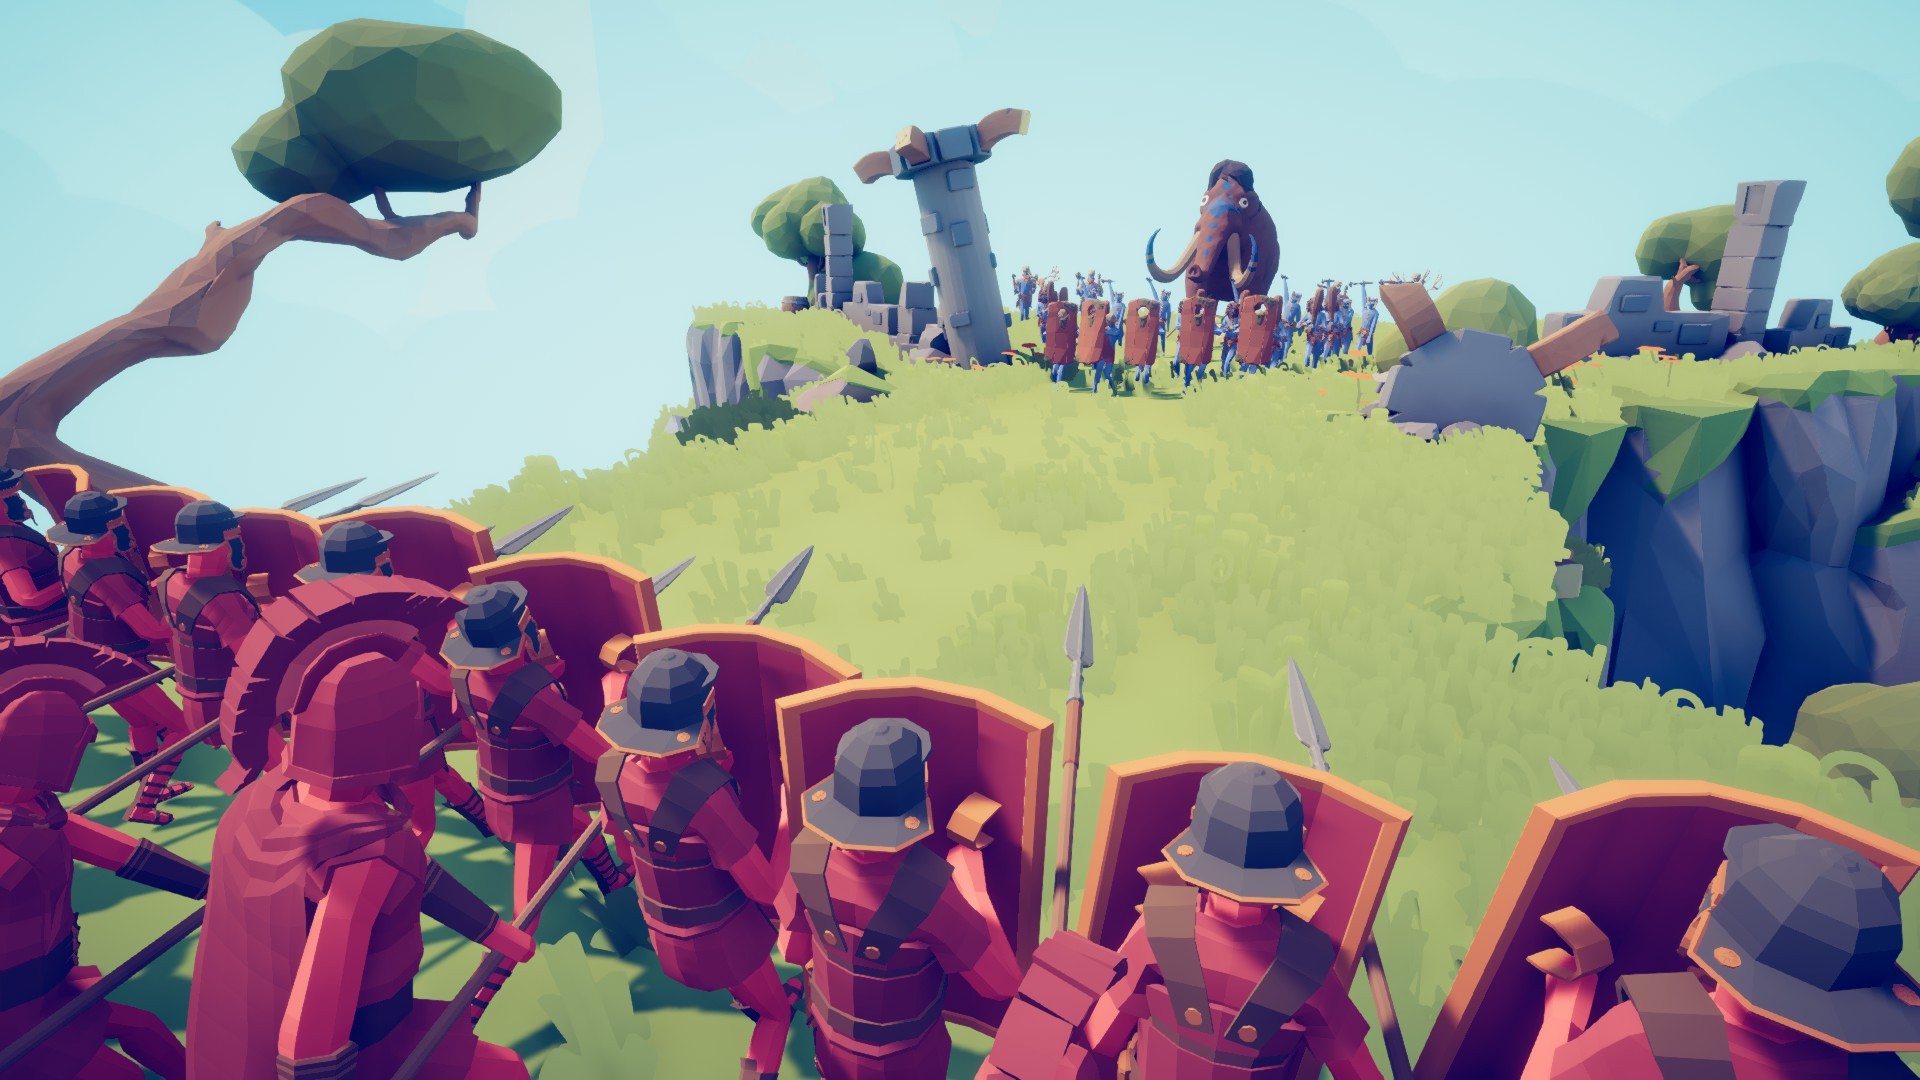 totally accurate battle simulator free pc